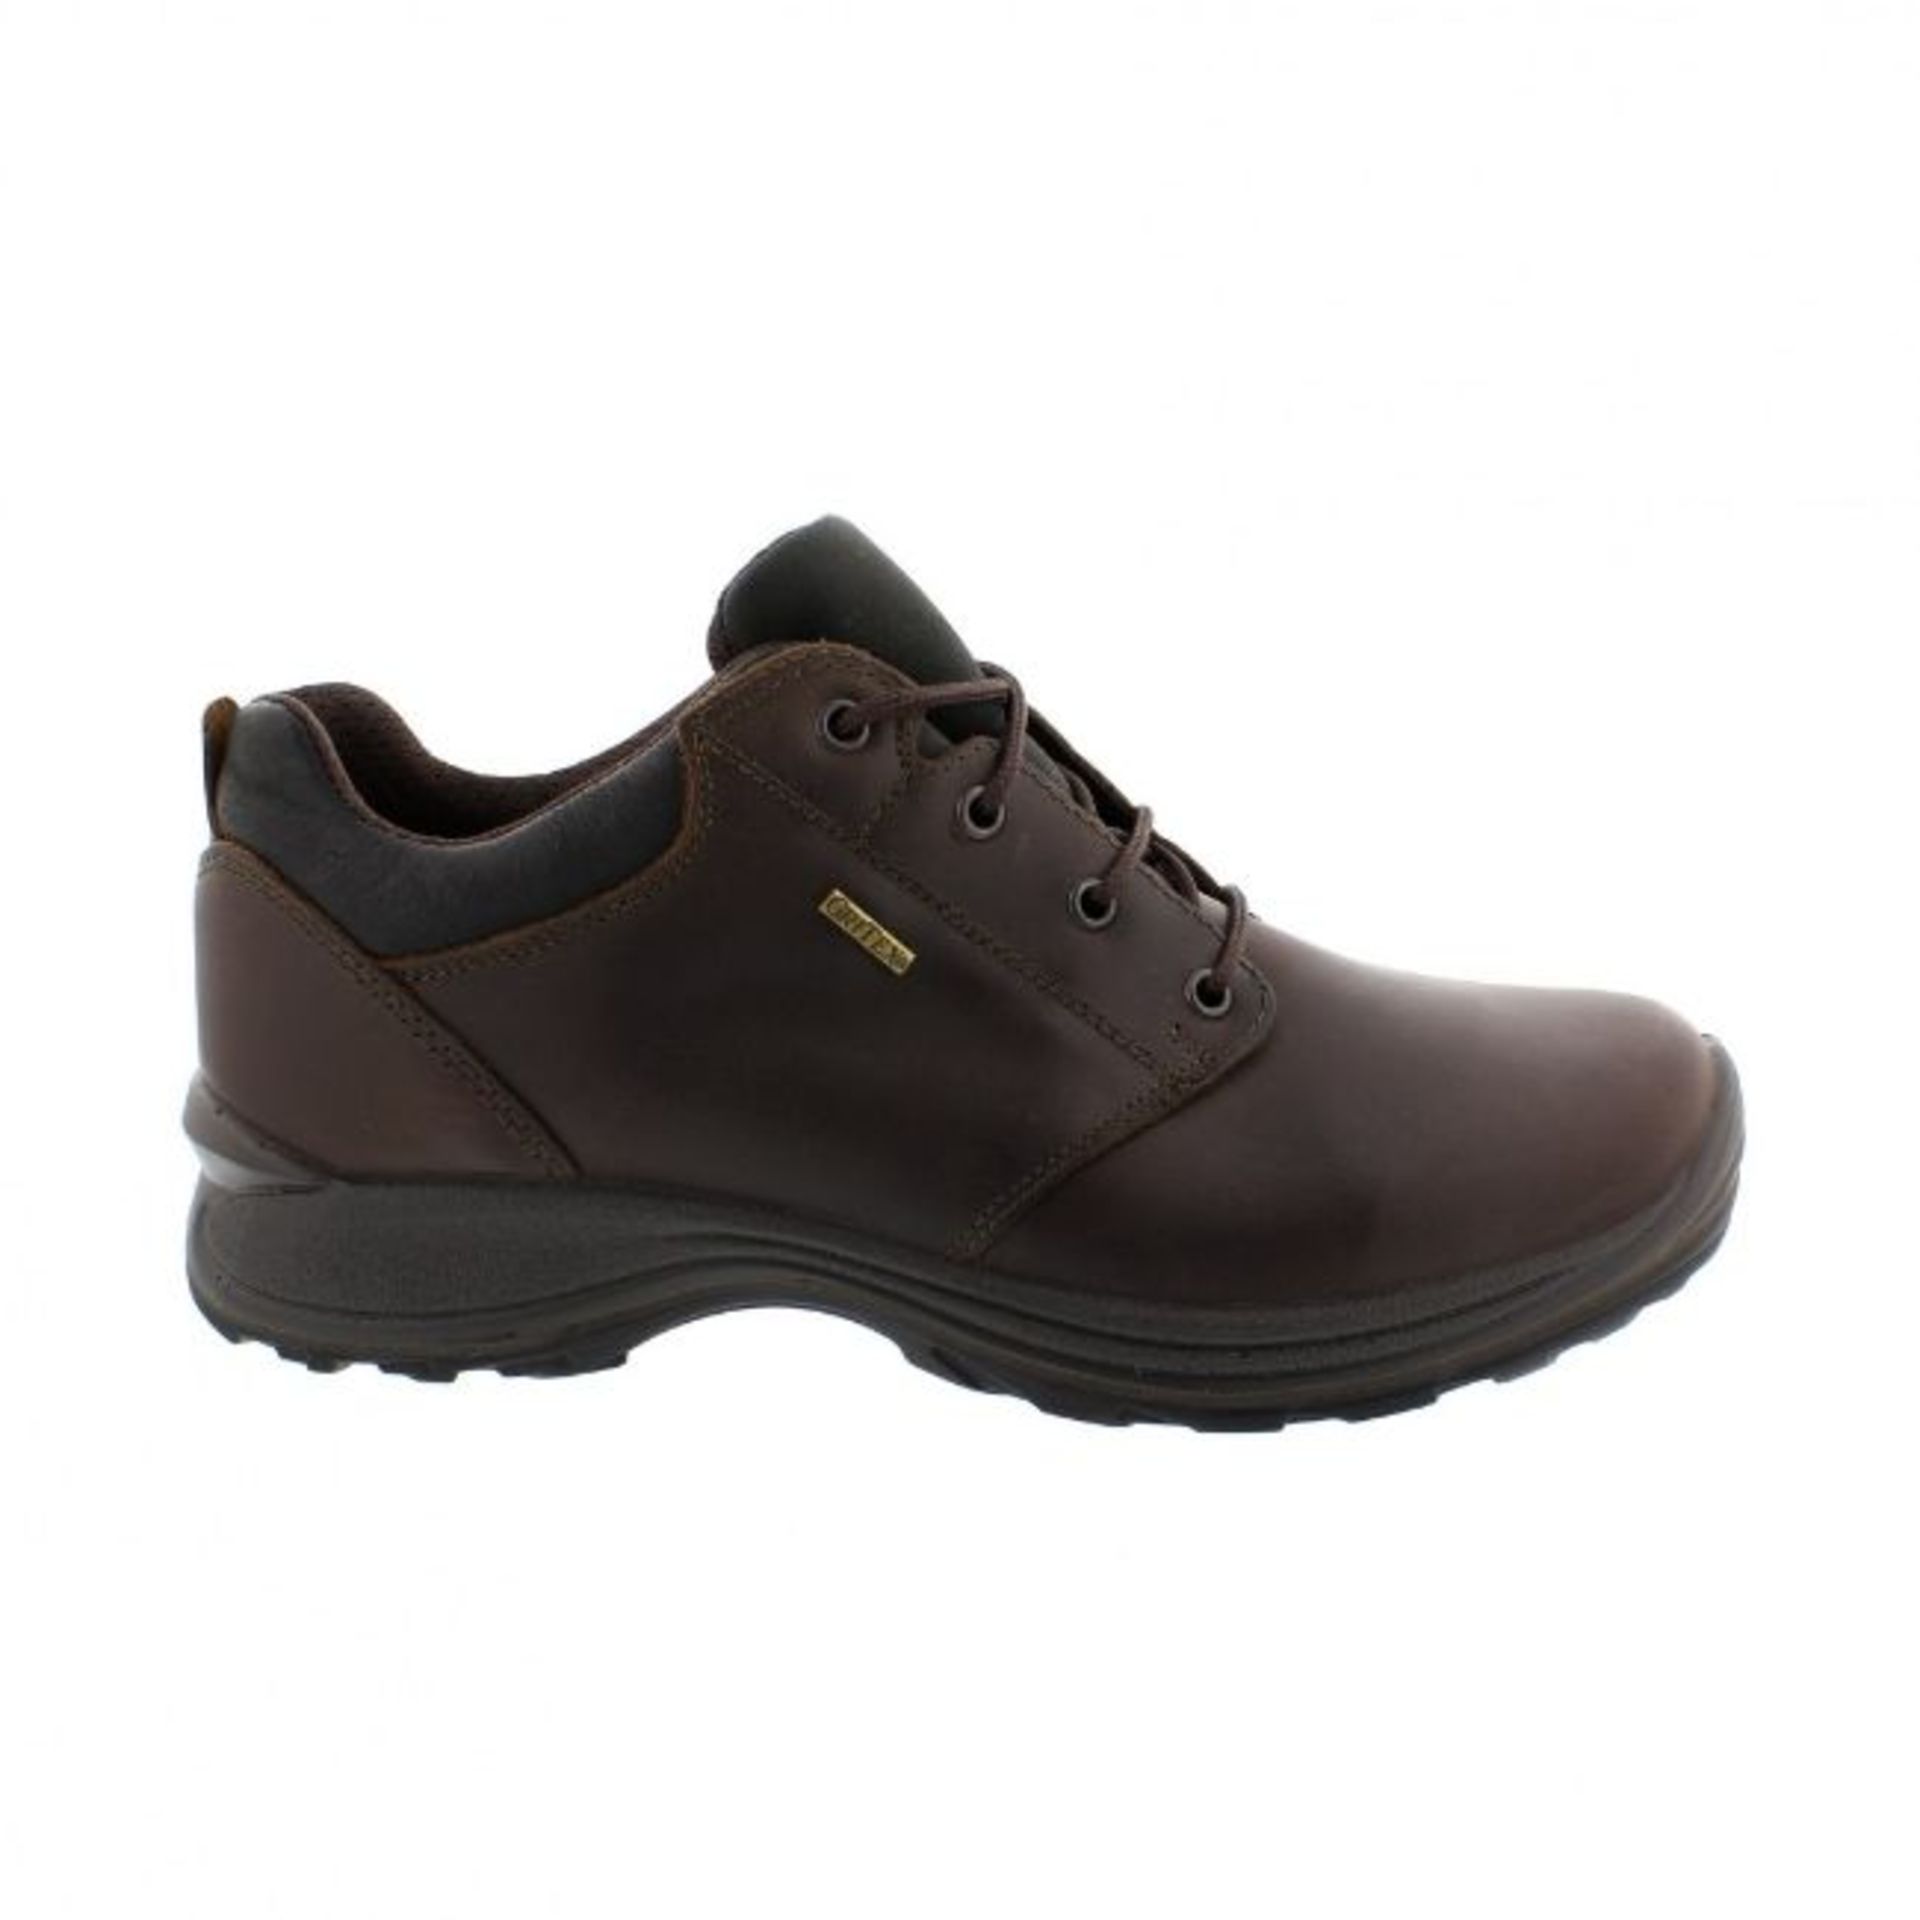 1 x Pair of Men's Grisport Brown Leather GriTex Shoes - Rogerson Footwear - Brand New and Boxed - - Image 2 of 8